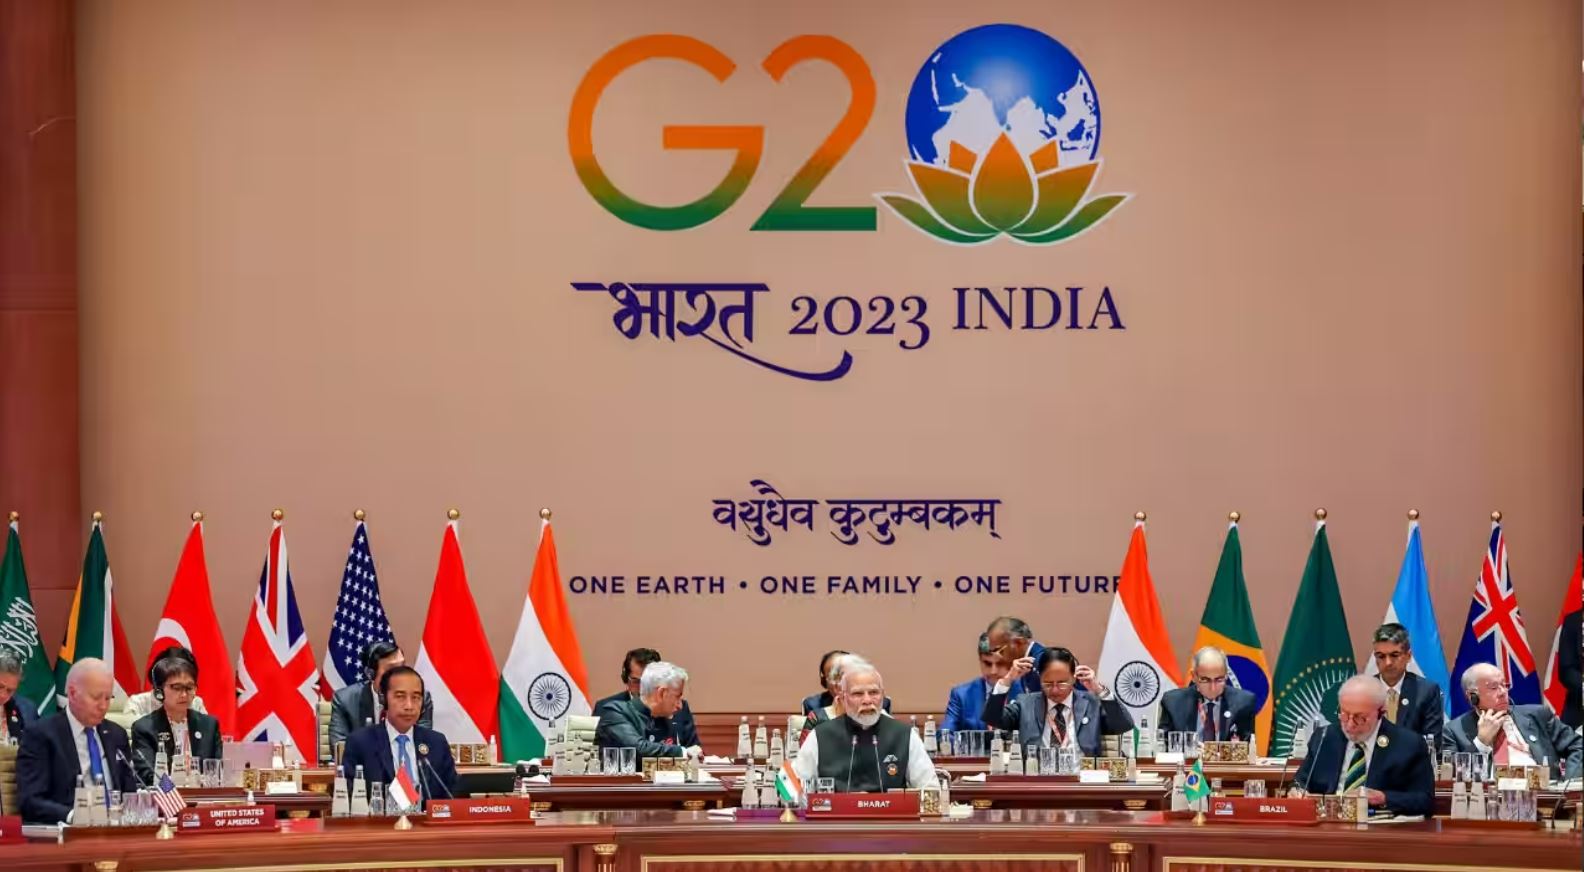 18th G20 Summit: Highlights from Day 1